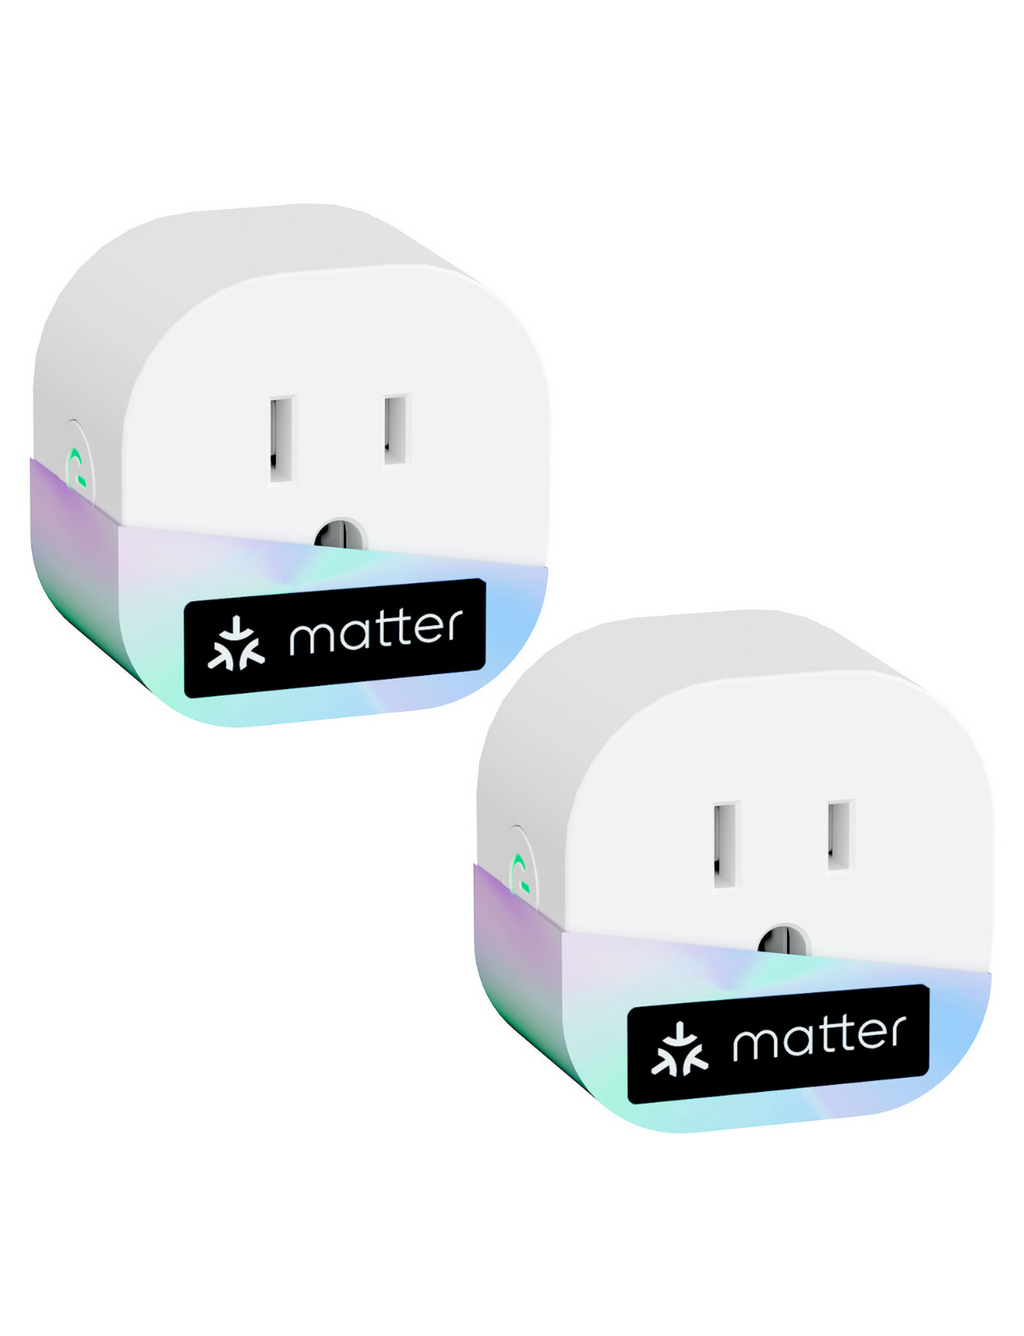 Leviton's new outdoor smart plug is the first to work with Matter